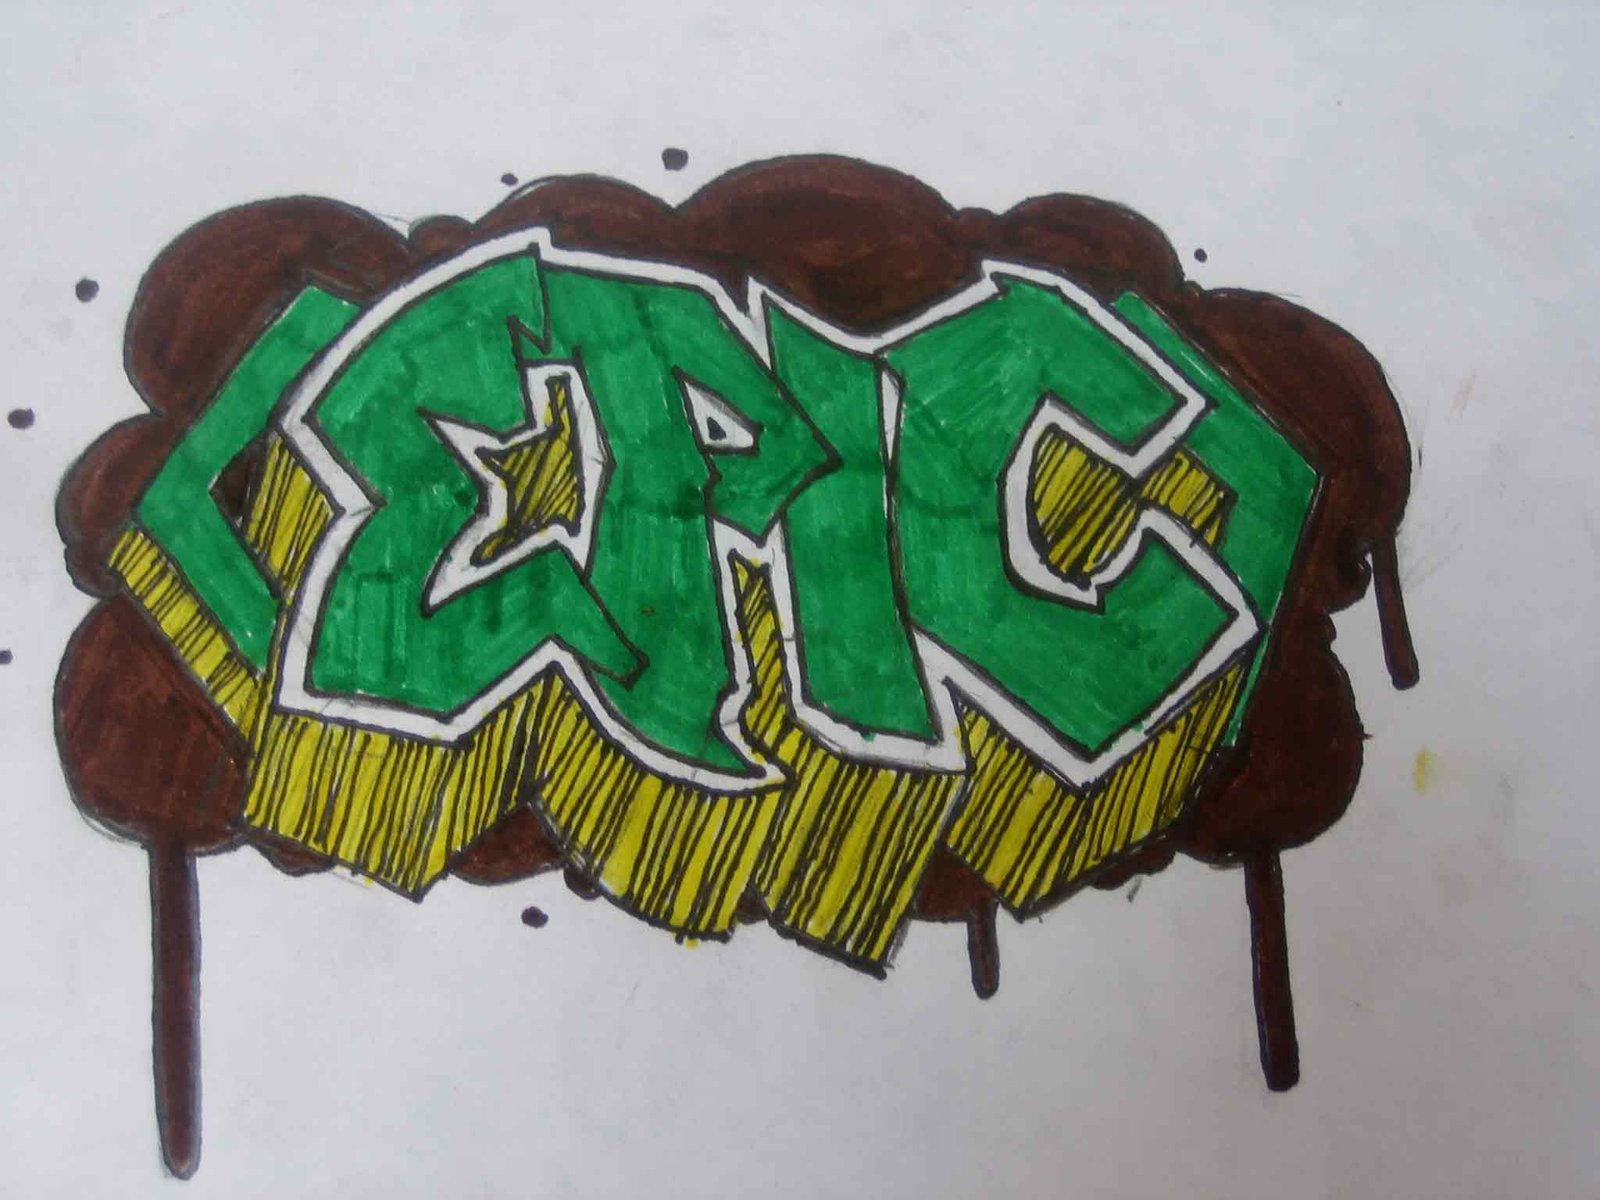 my first attempt at tagging (sloppy)